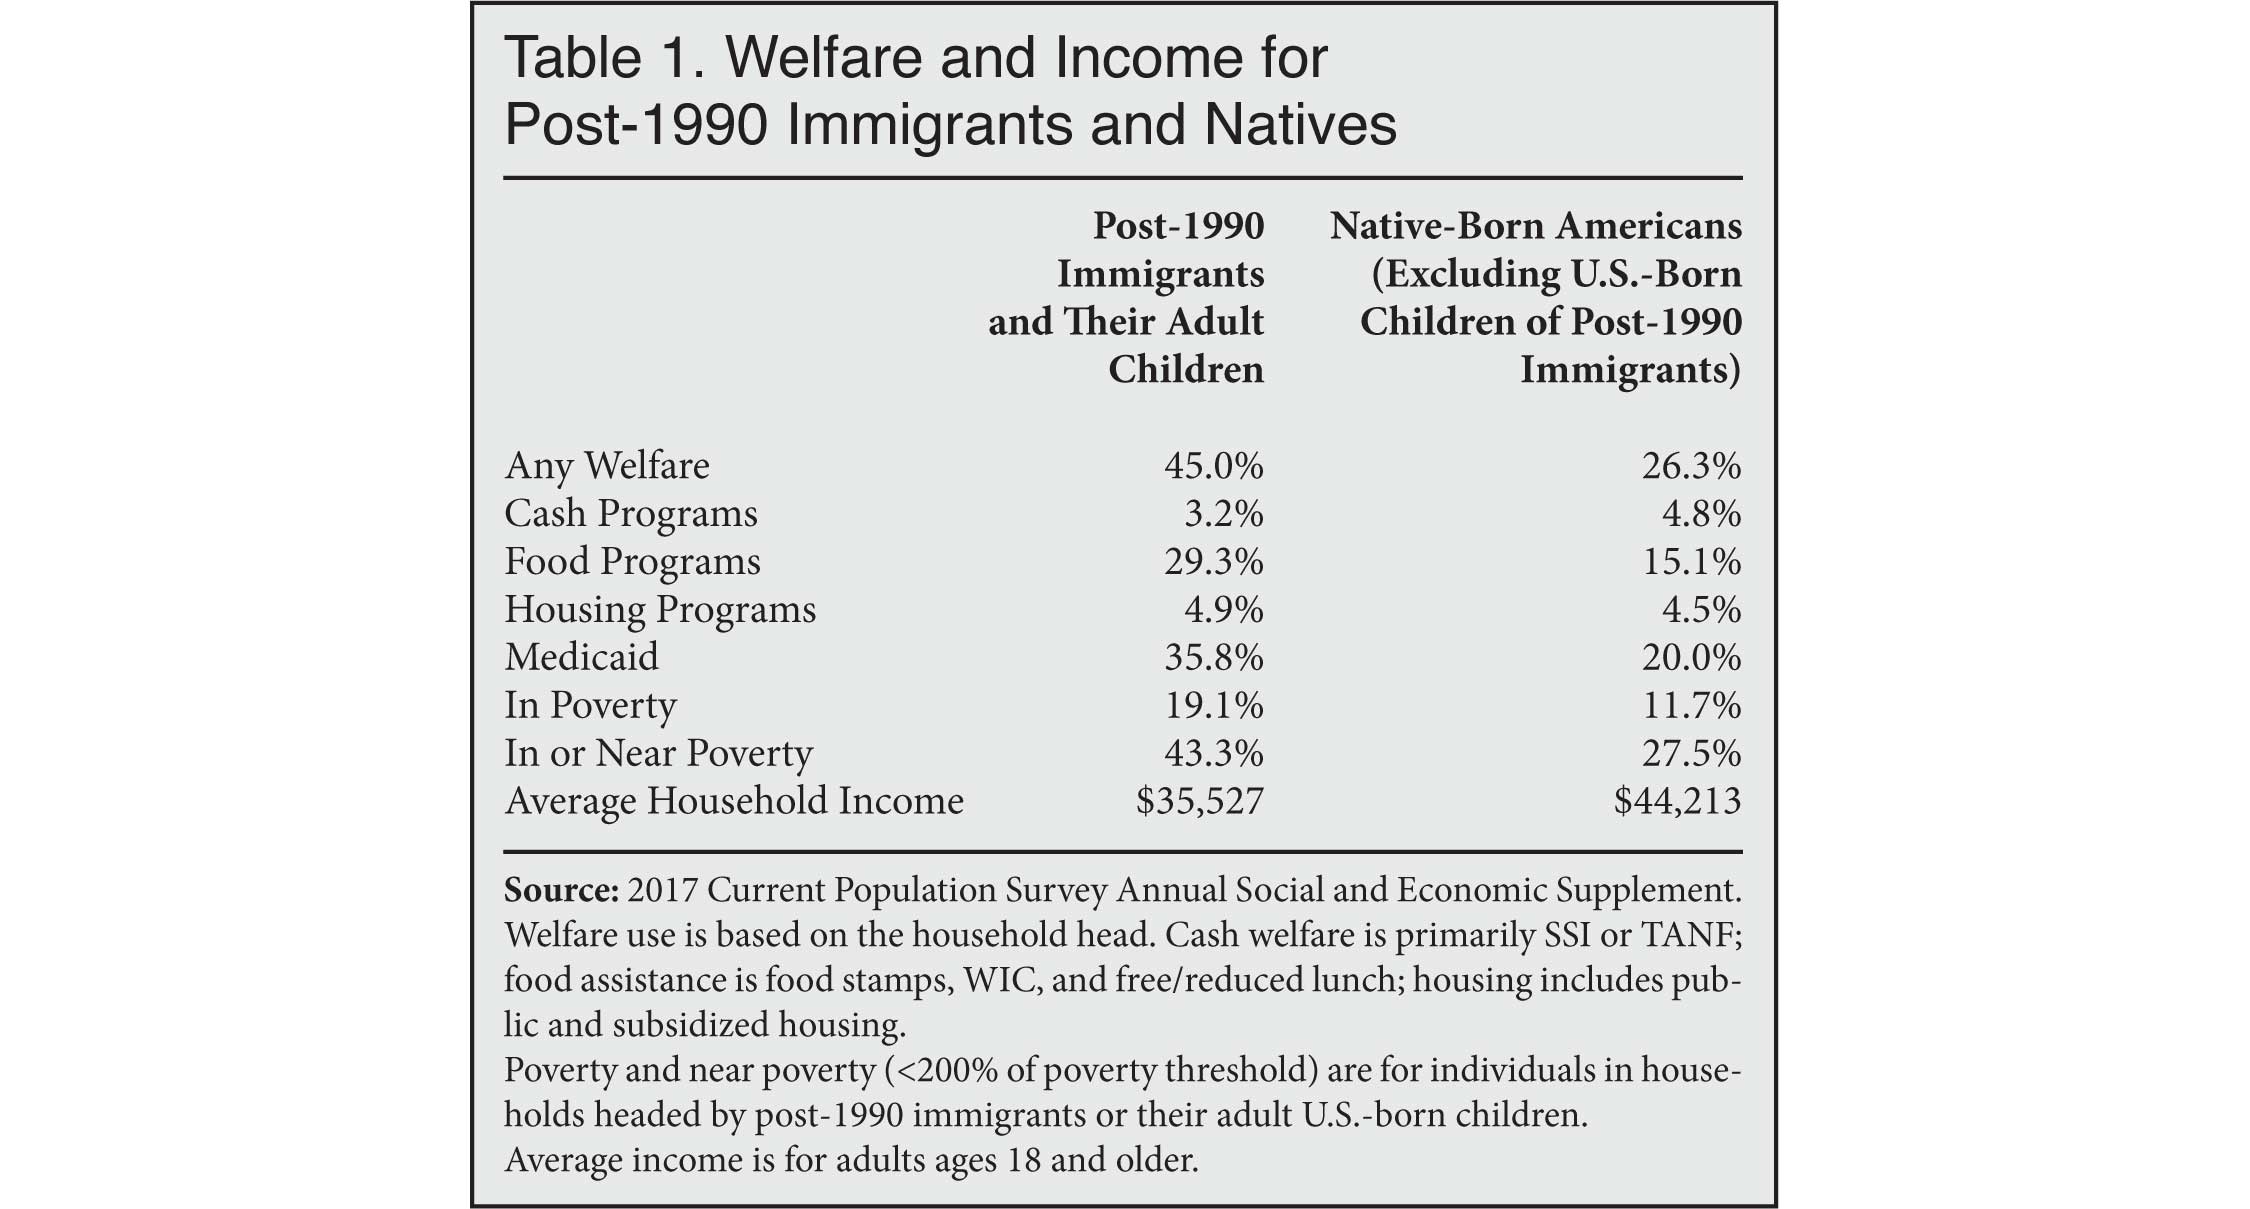 Welfate and income for post-1990 immigrants and natives